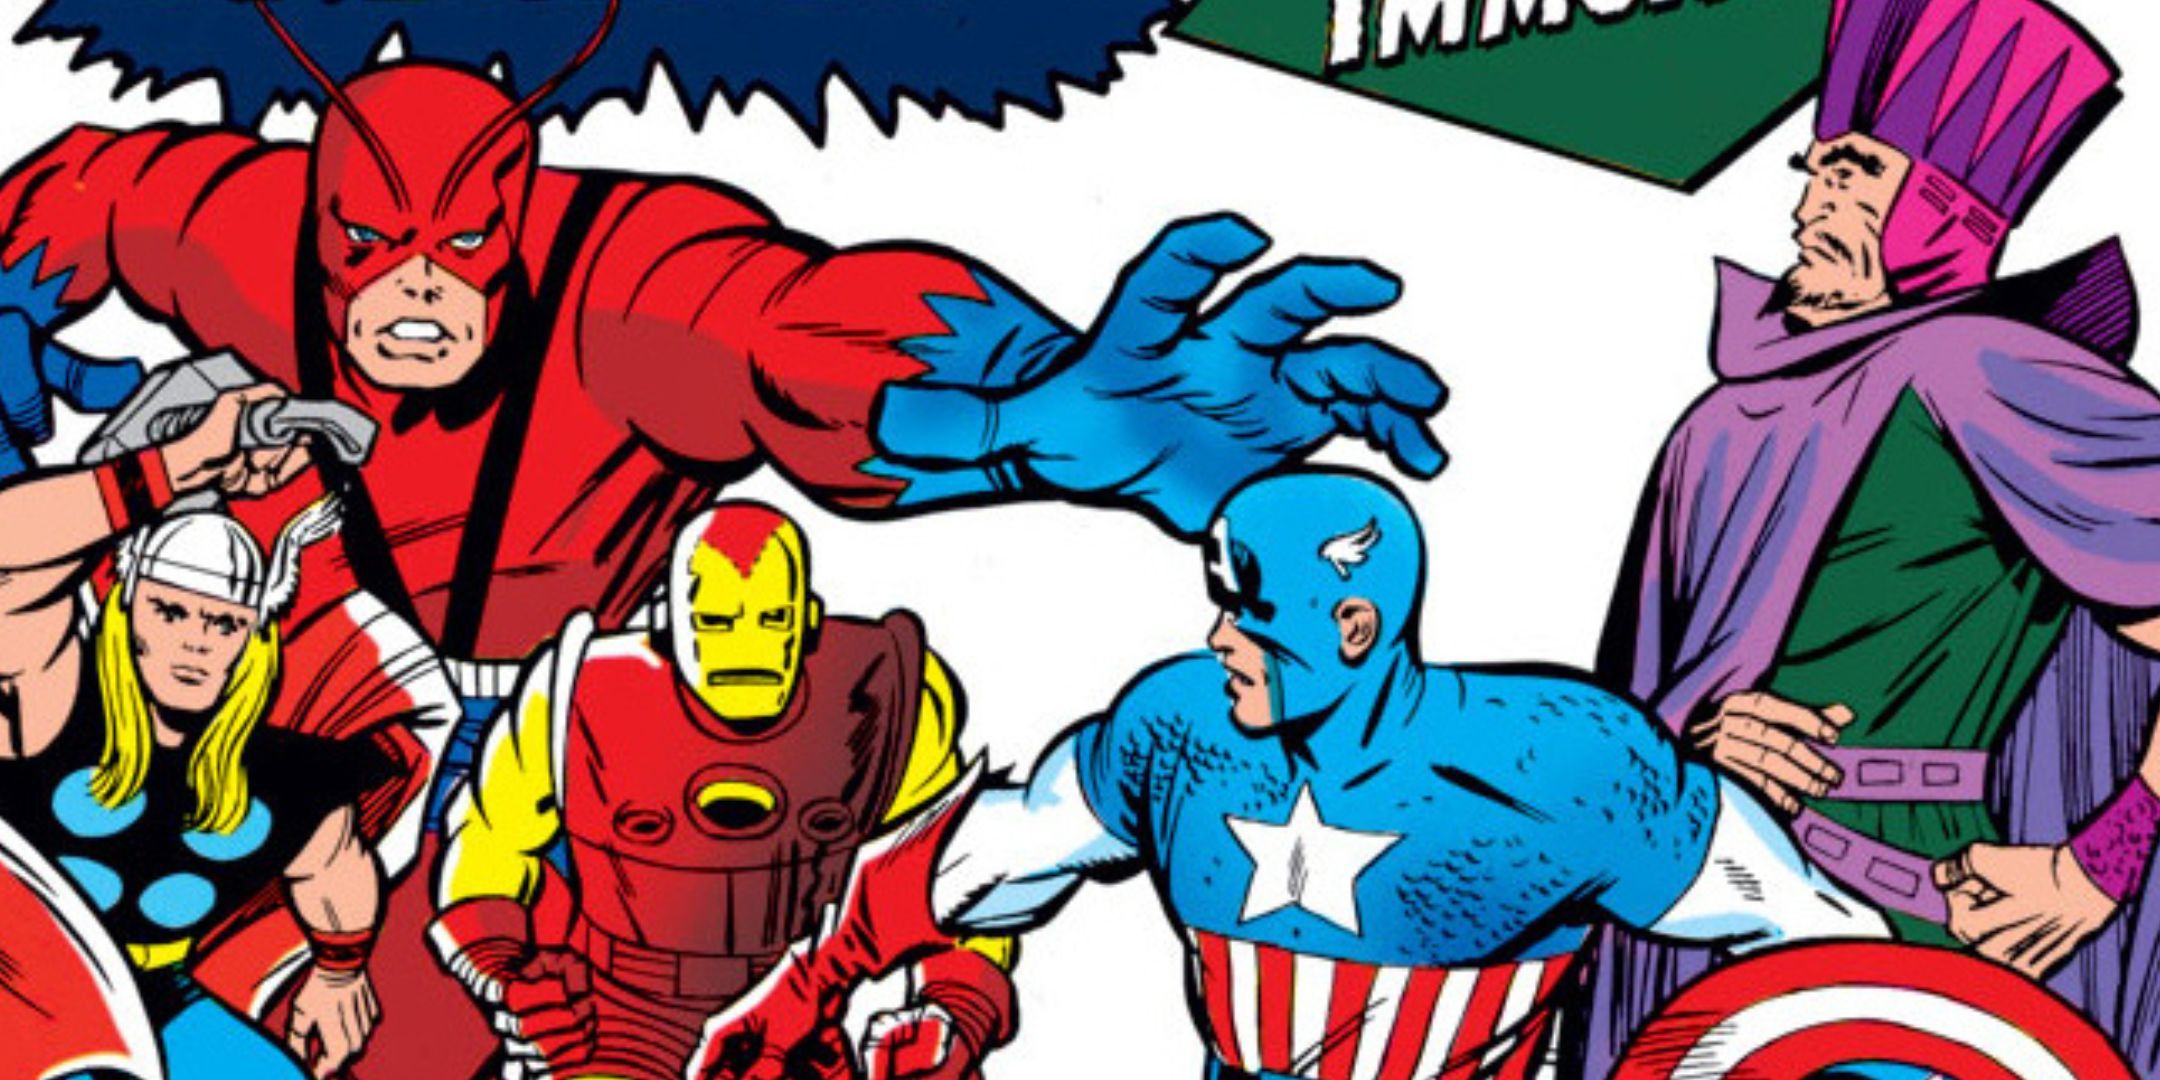 Immortus first appearance in Avengers comics